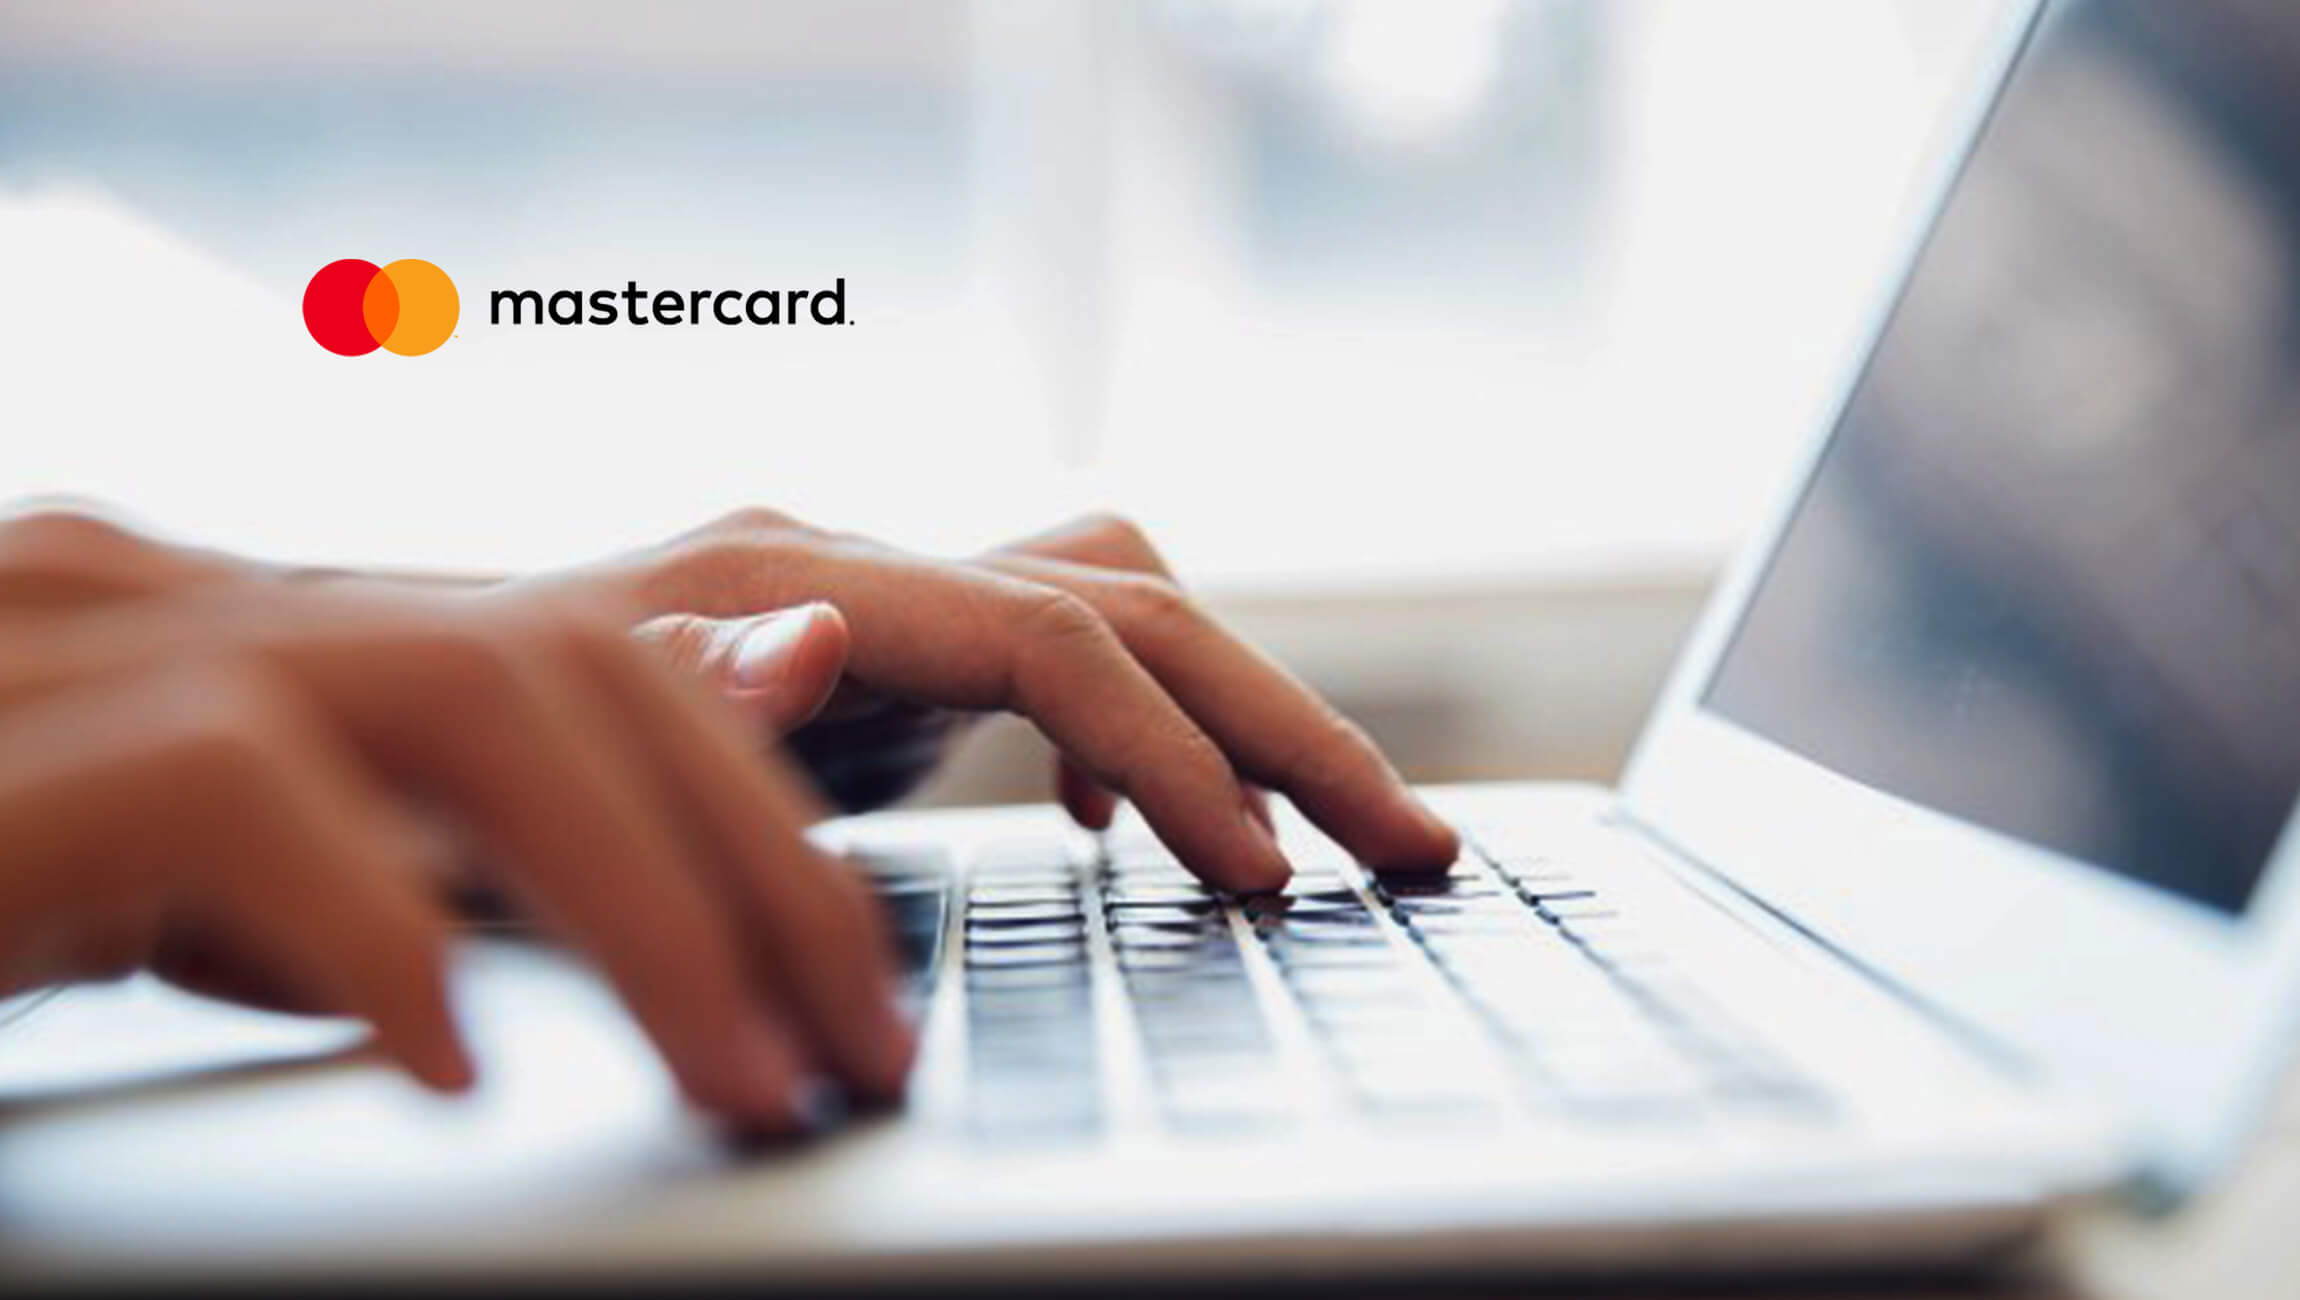 Mastercard-Small-Business-Cardholders-Gain-Access-to-Business-Tools-from-Microsoft (1)